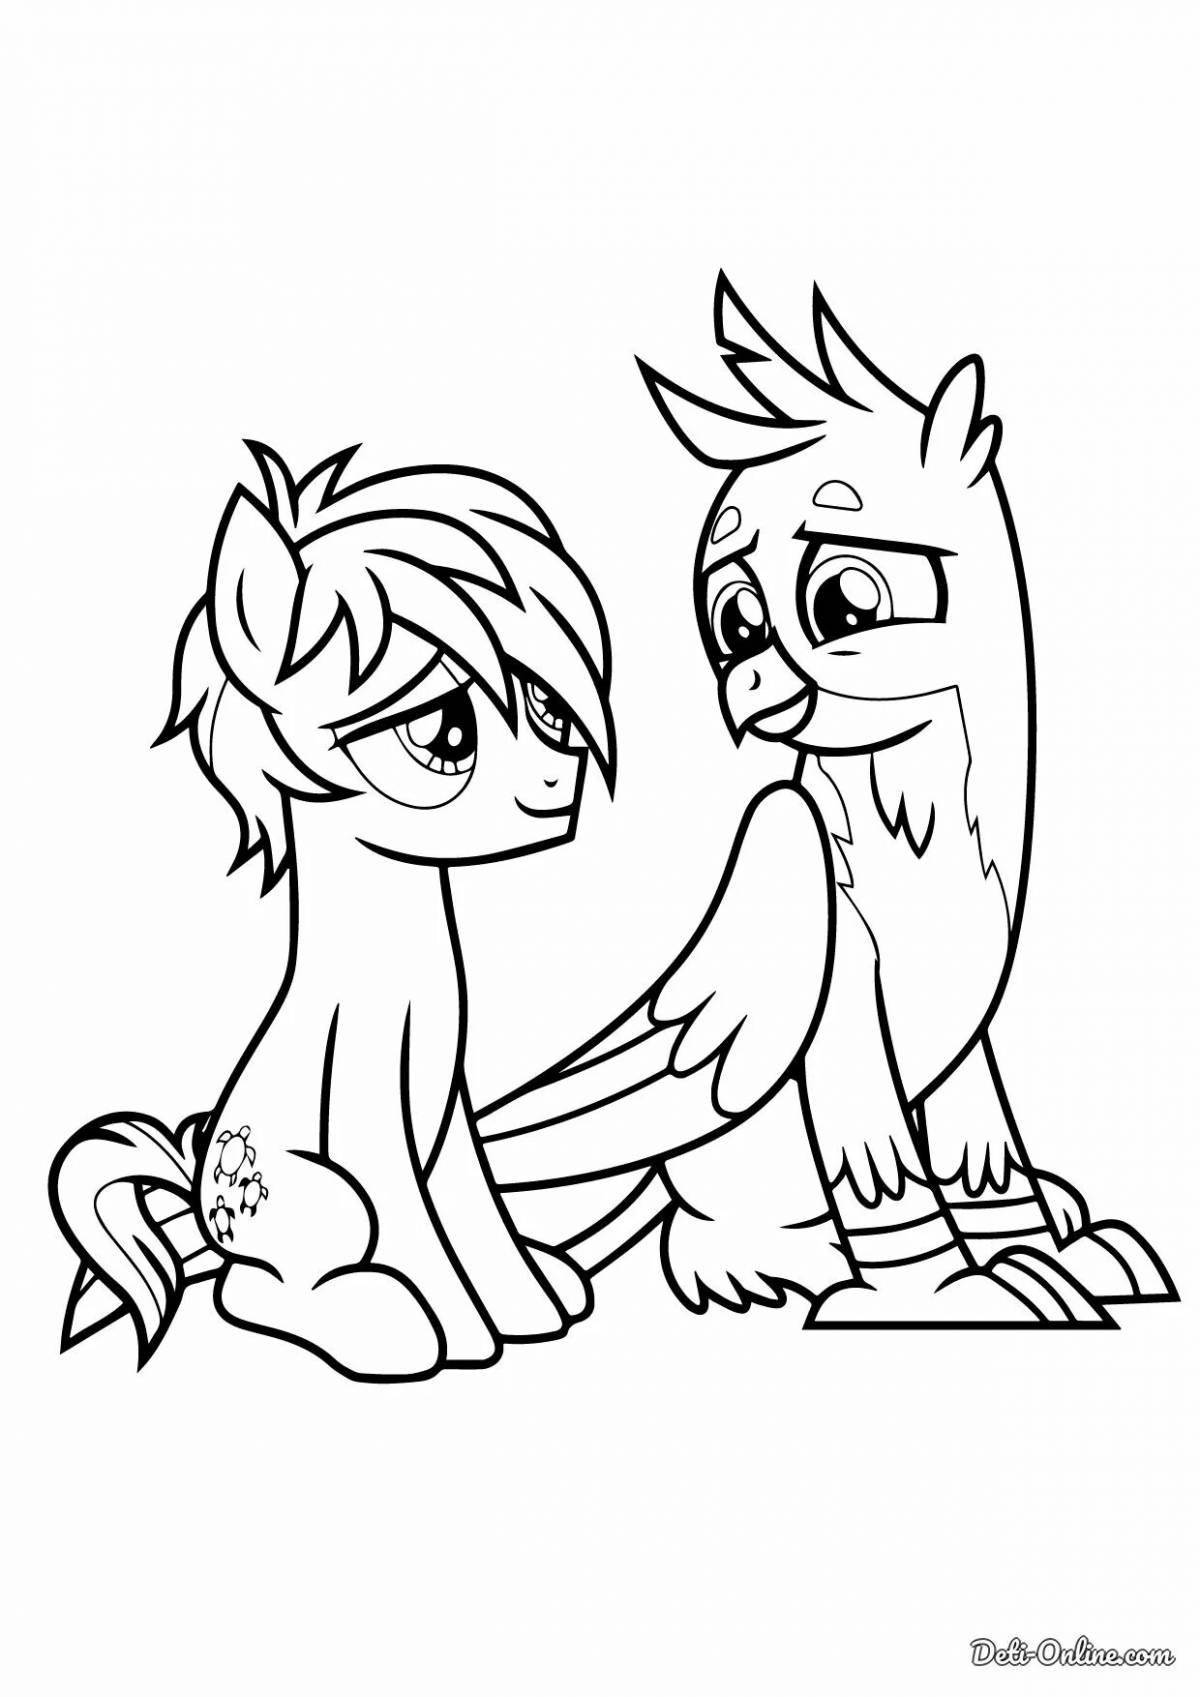 Exciting spike pony coloring book